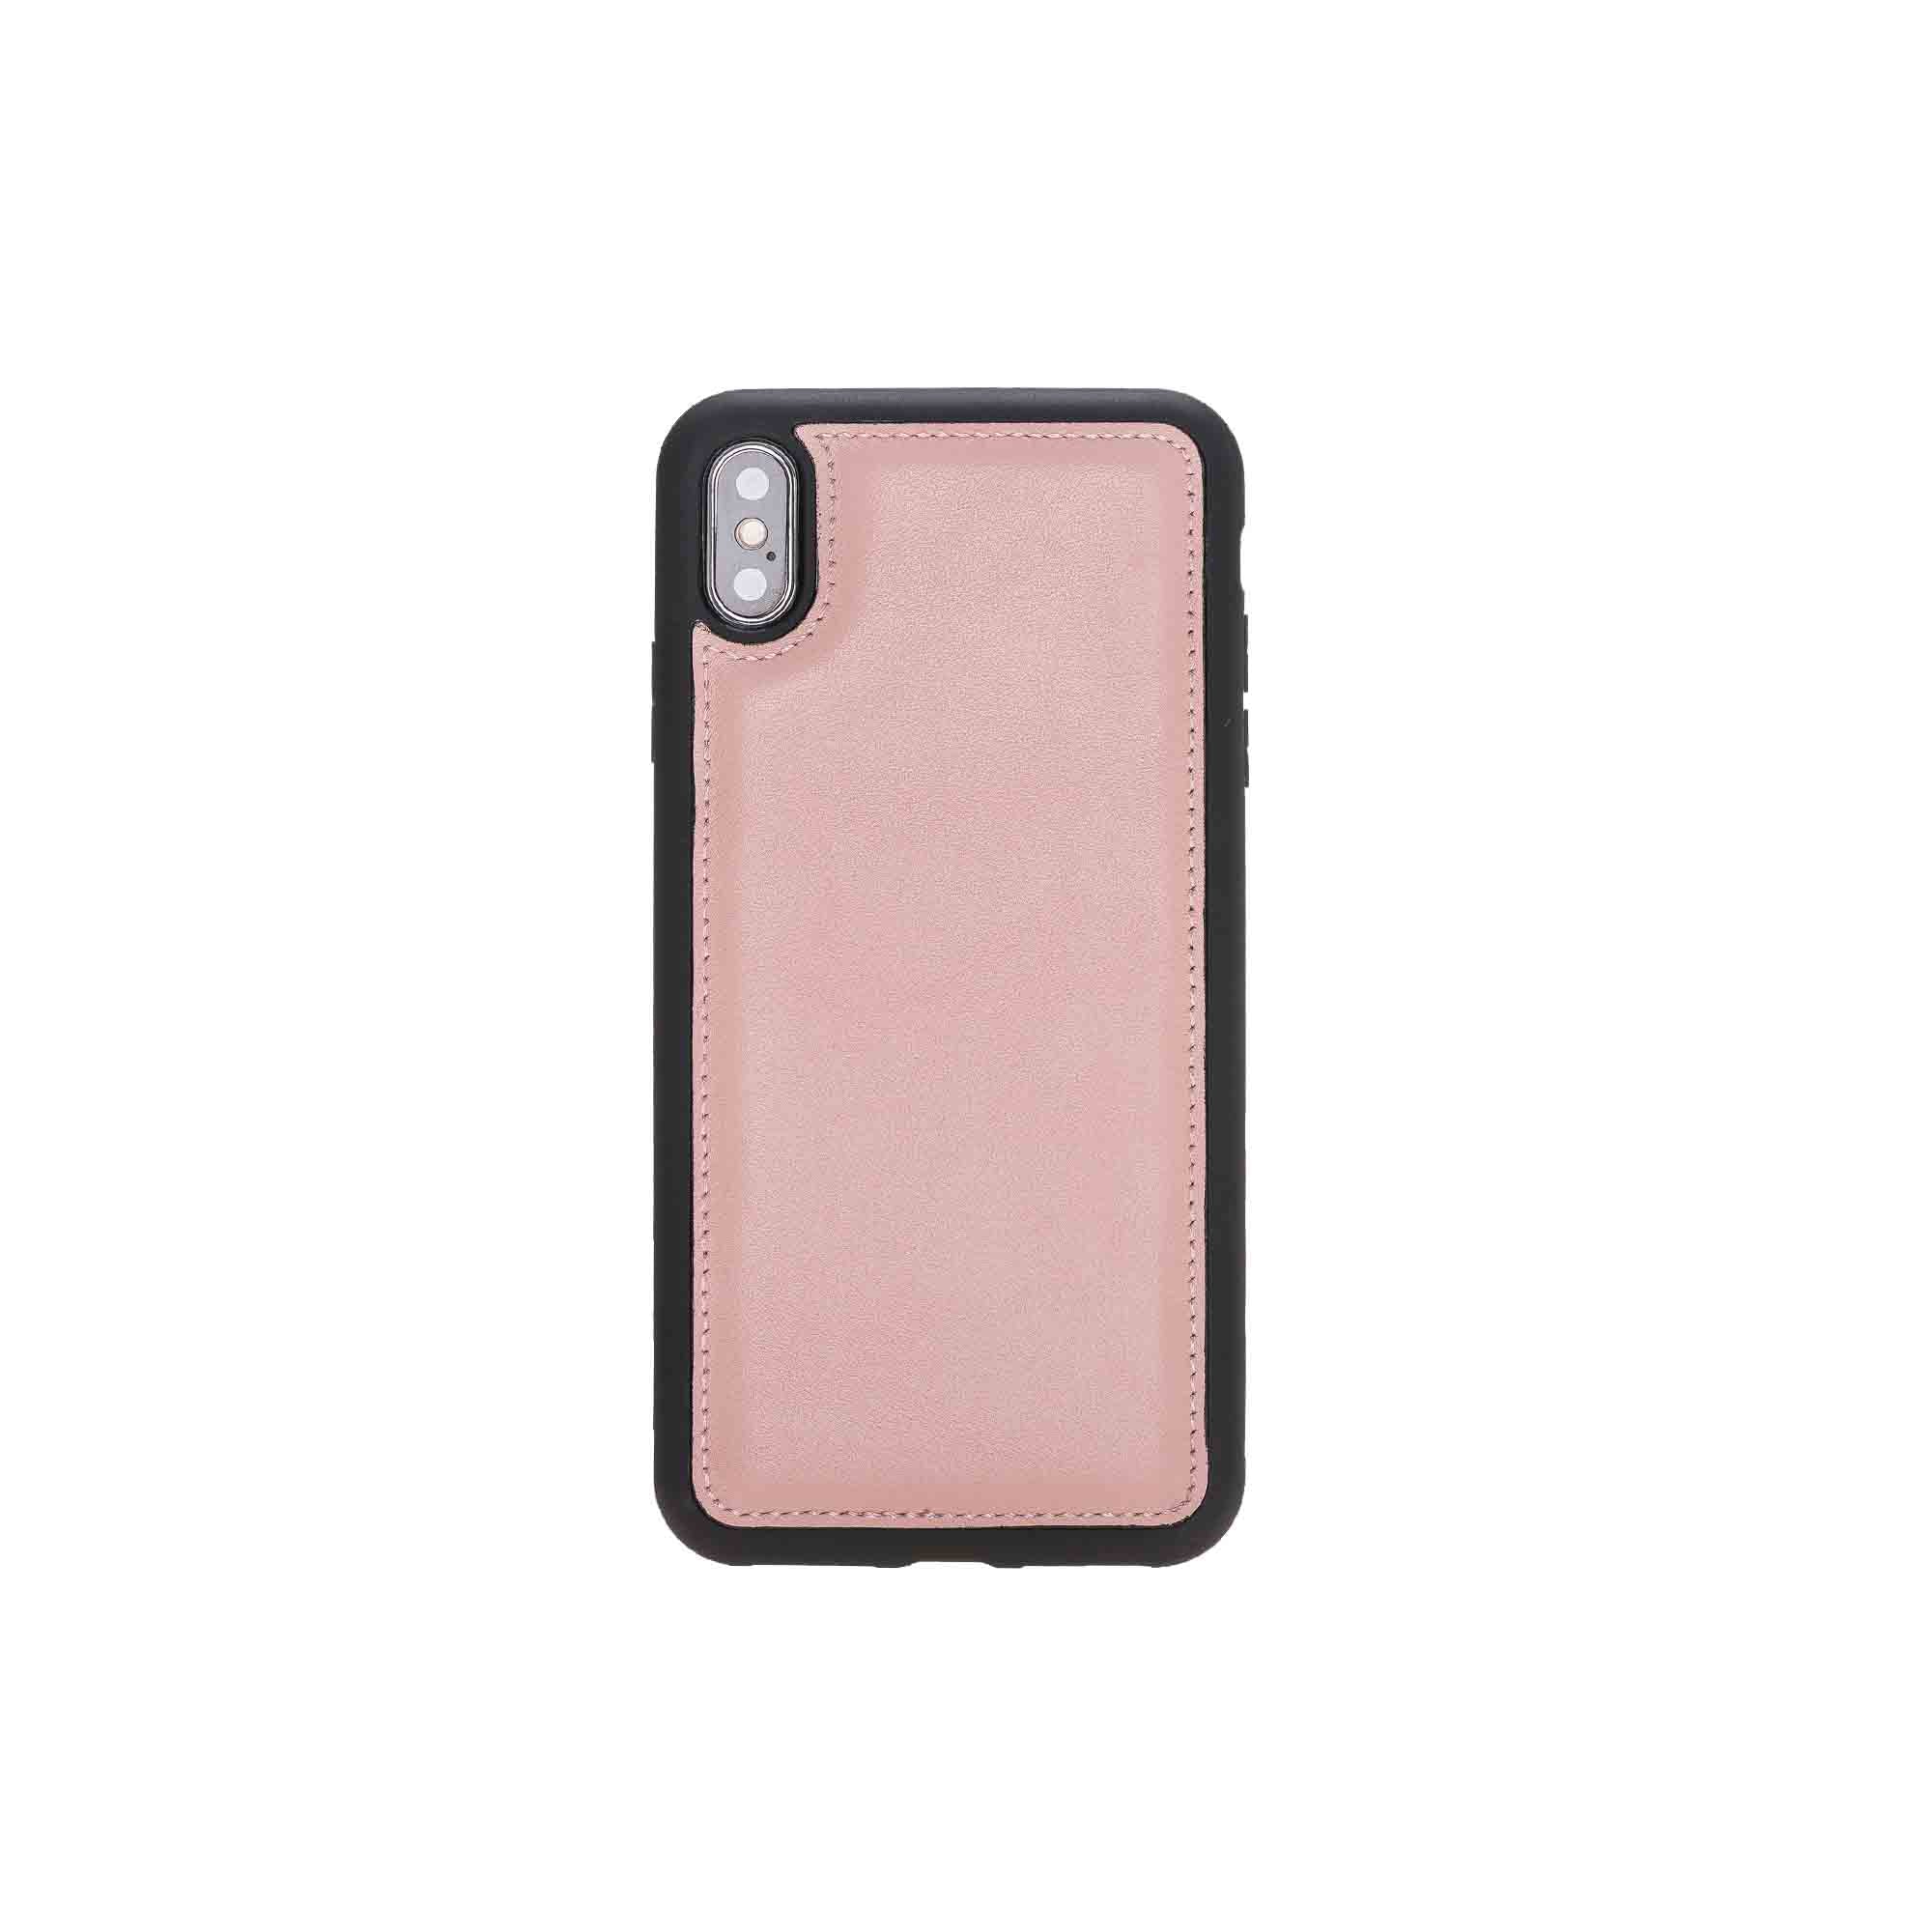 Flex Cover Leather Case for iPhone XS Max (6.5") - PINK - saracleather